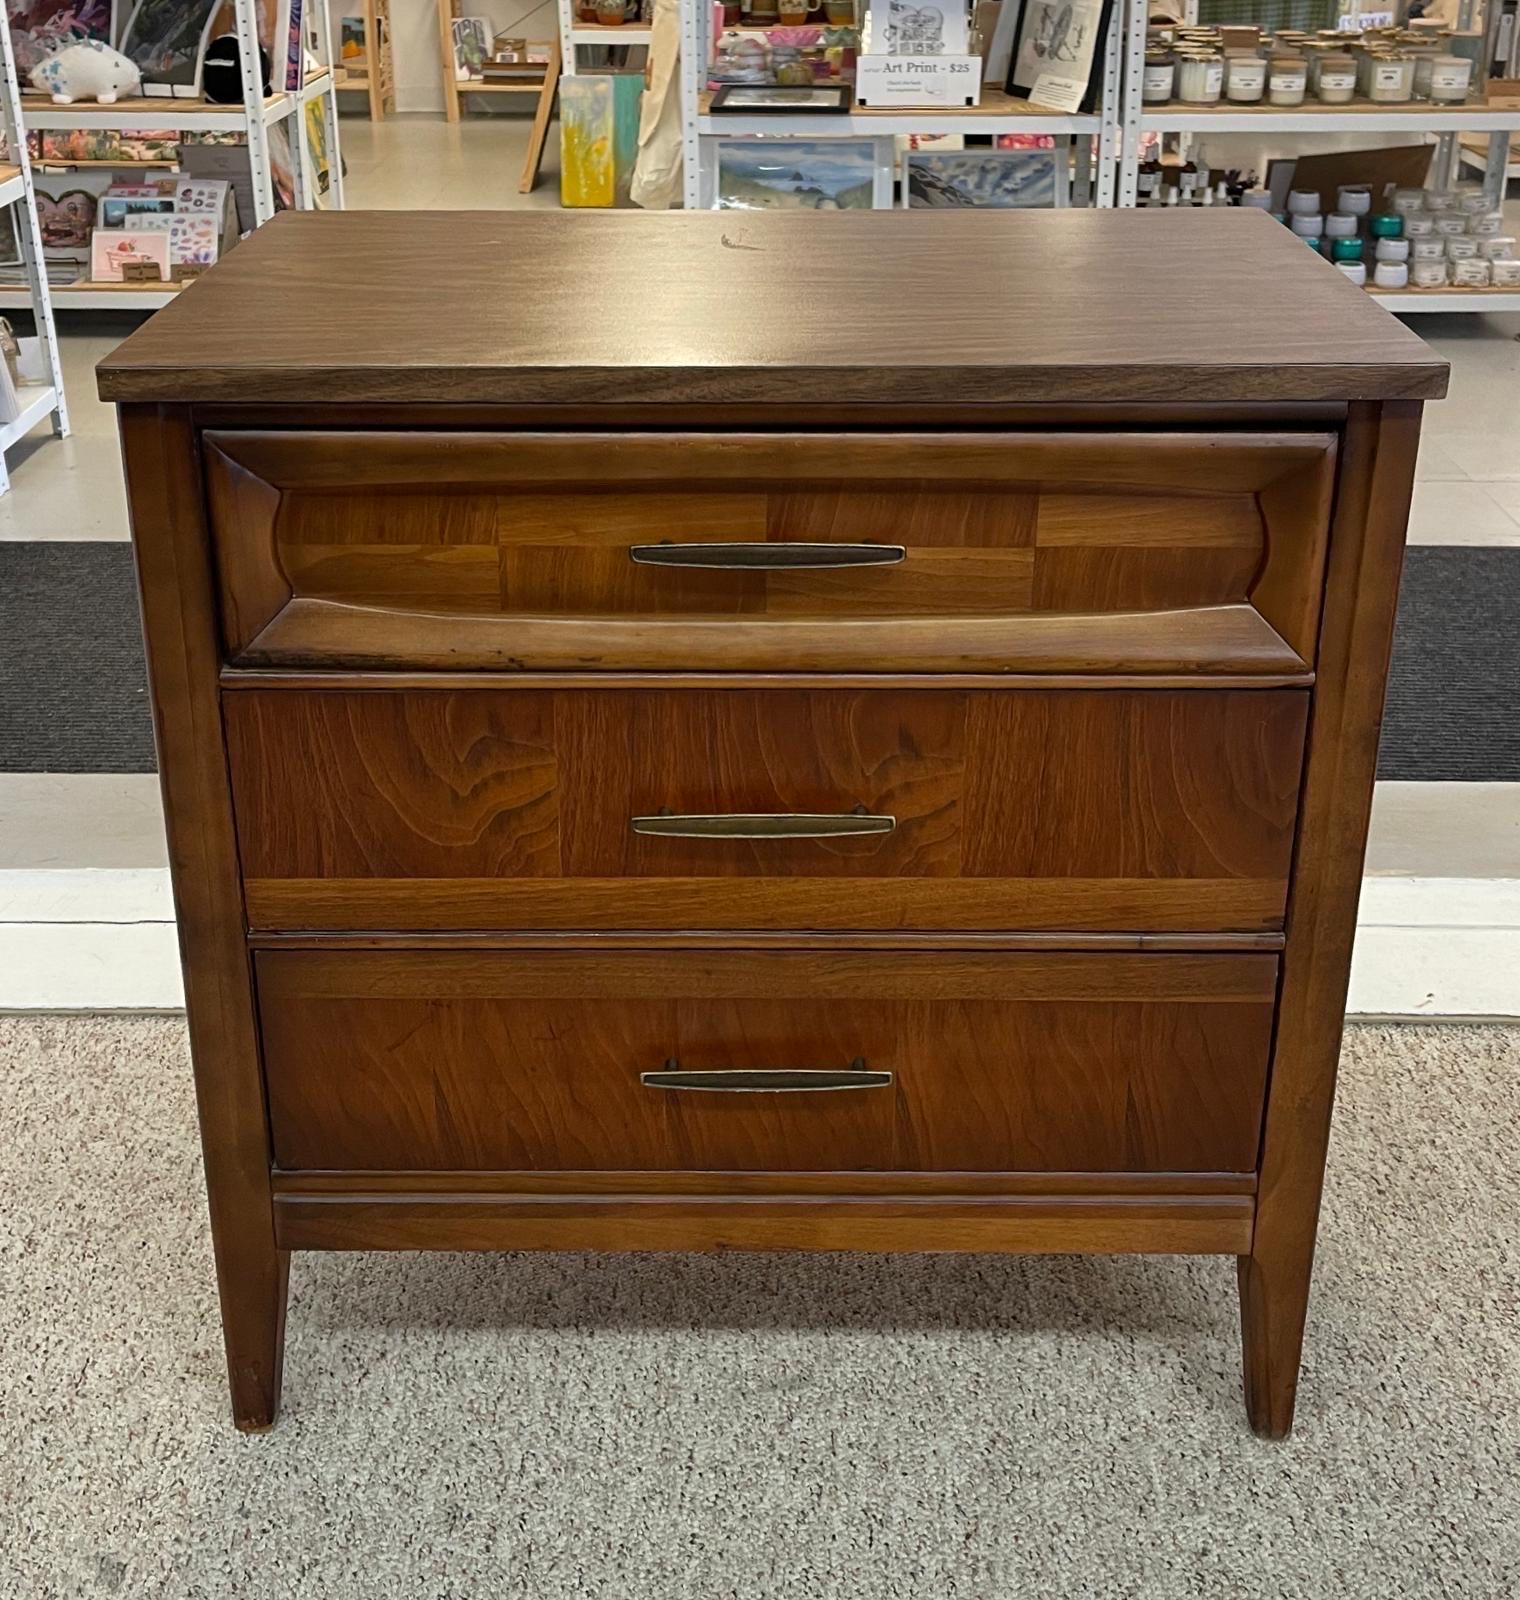 This walnut toned petite dresser has beautiful wood grain detailing on the drawers. Dovetail Drawers. Original hardware. Vintage Condition Consistent with Age as Pictured.

Dimensions. 30 W ; 18 D ; 31 H